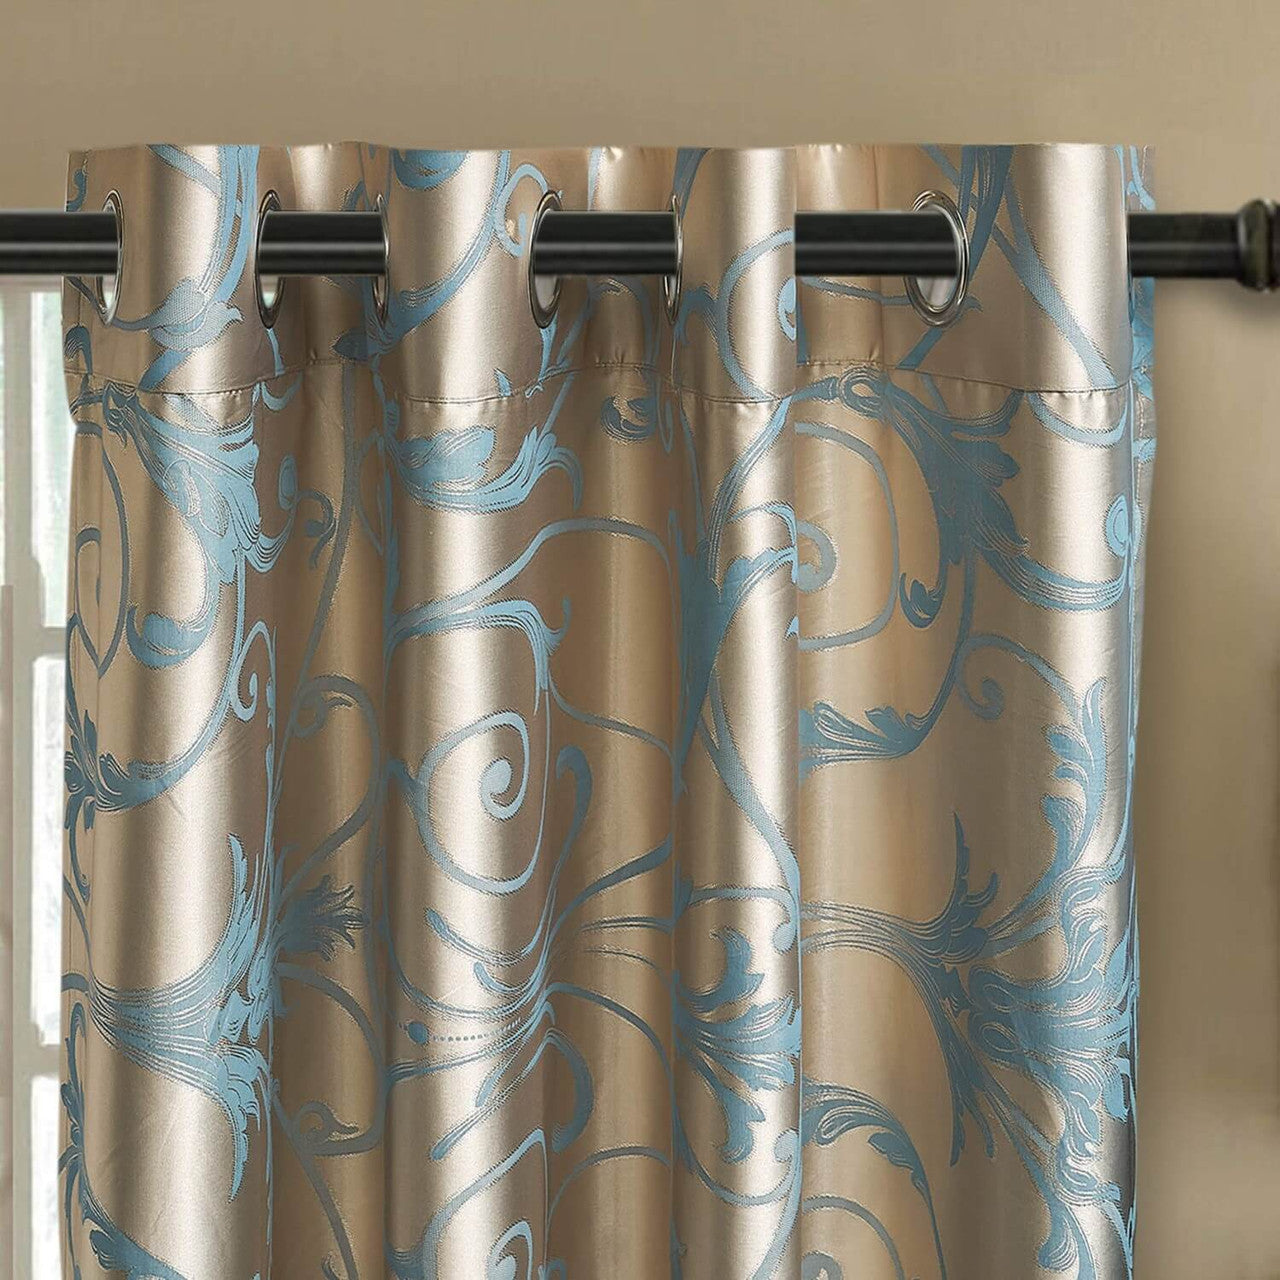 St. Petersburg - Luxurious Jacquard Curtains by Dolce-Mela